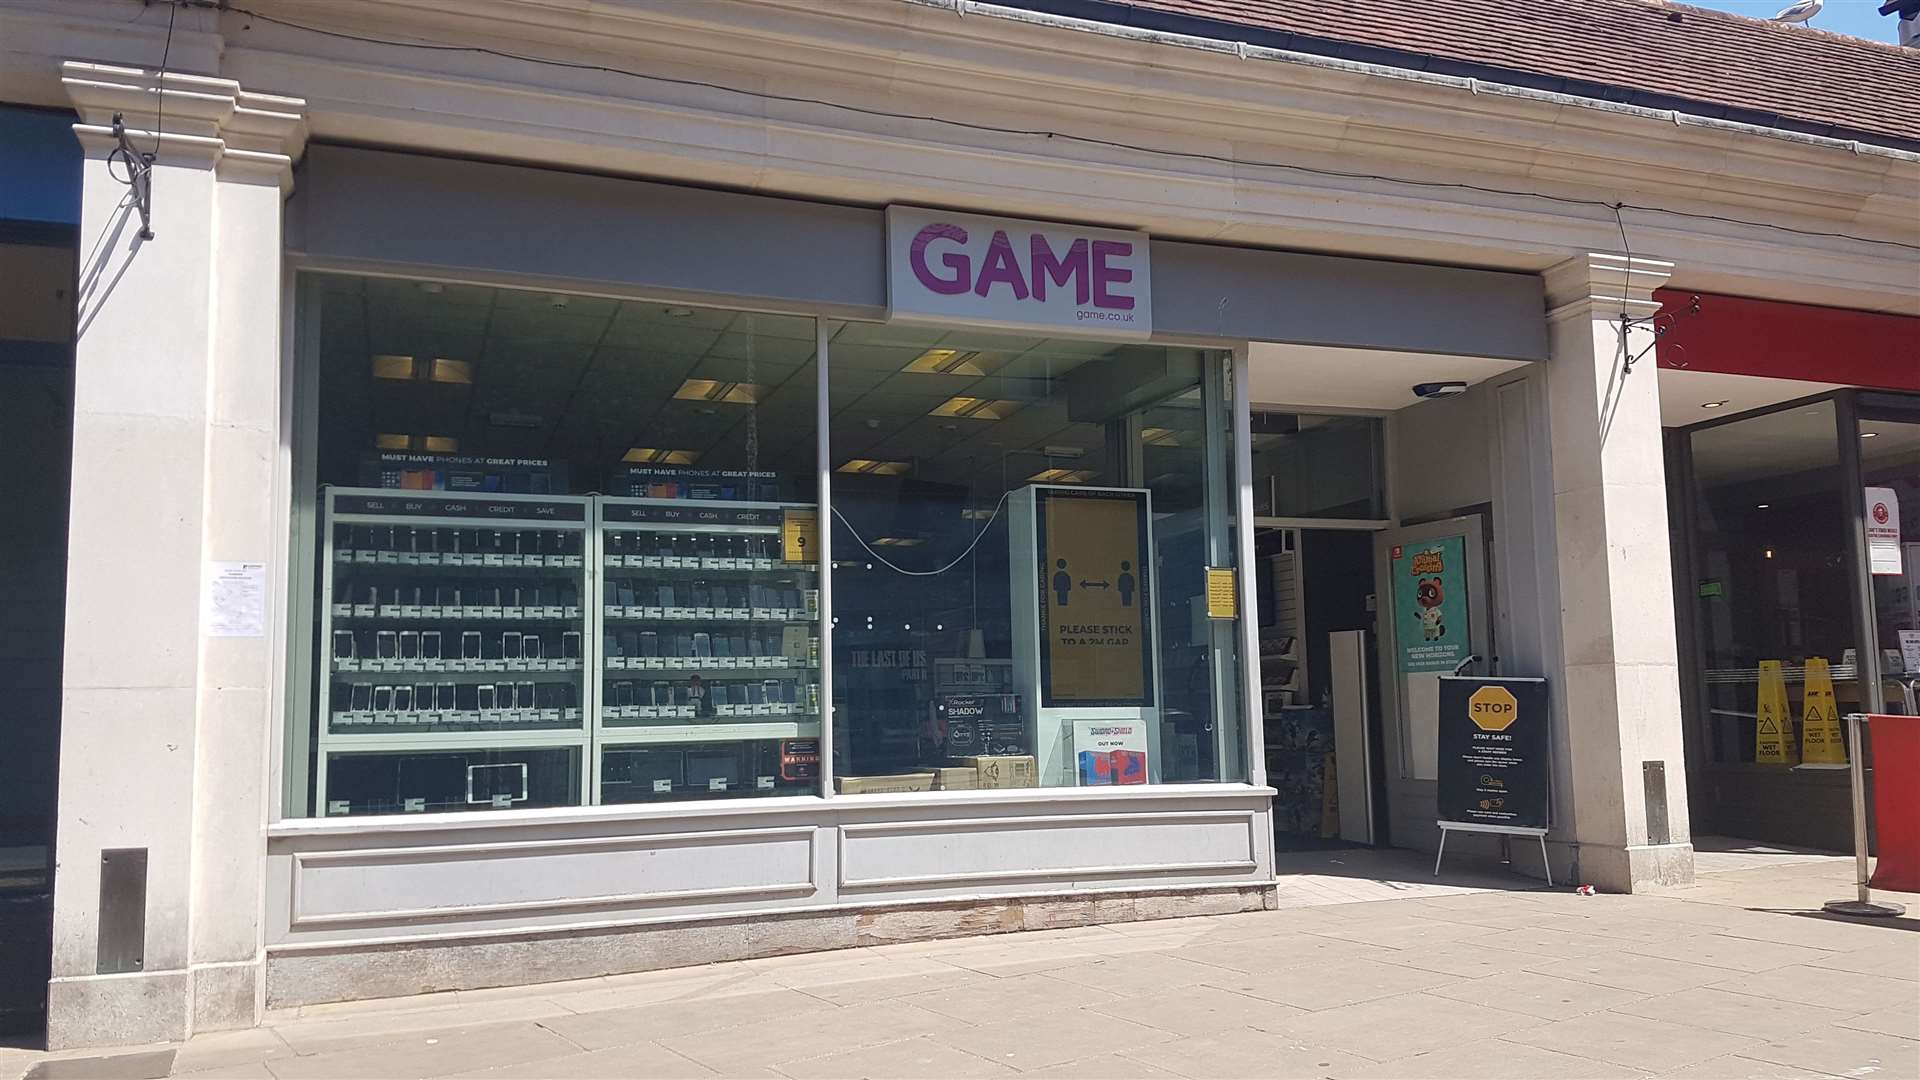 The soon-to-be vacated Game store could become a German Doner Kebab outlet